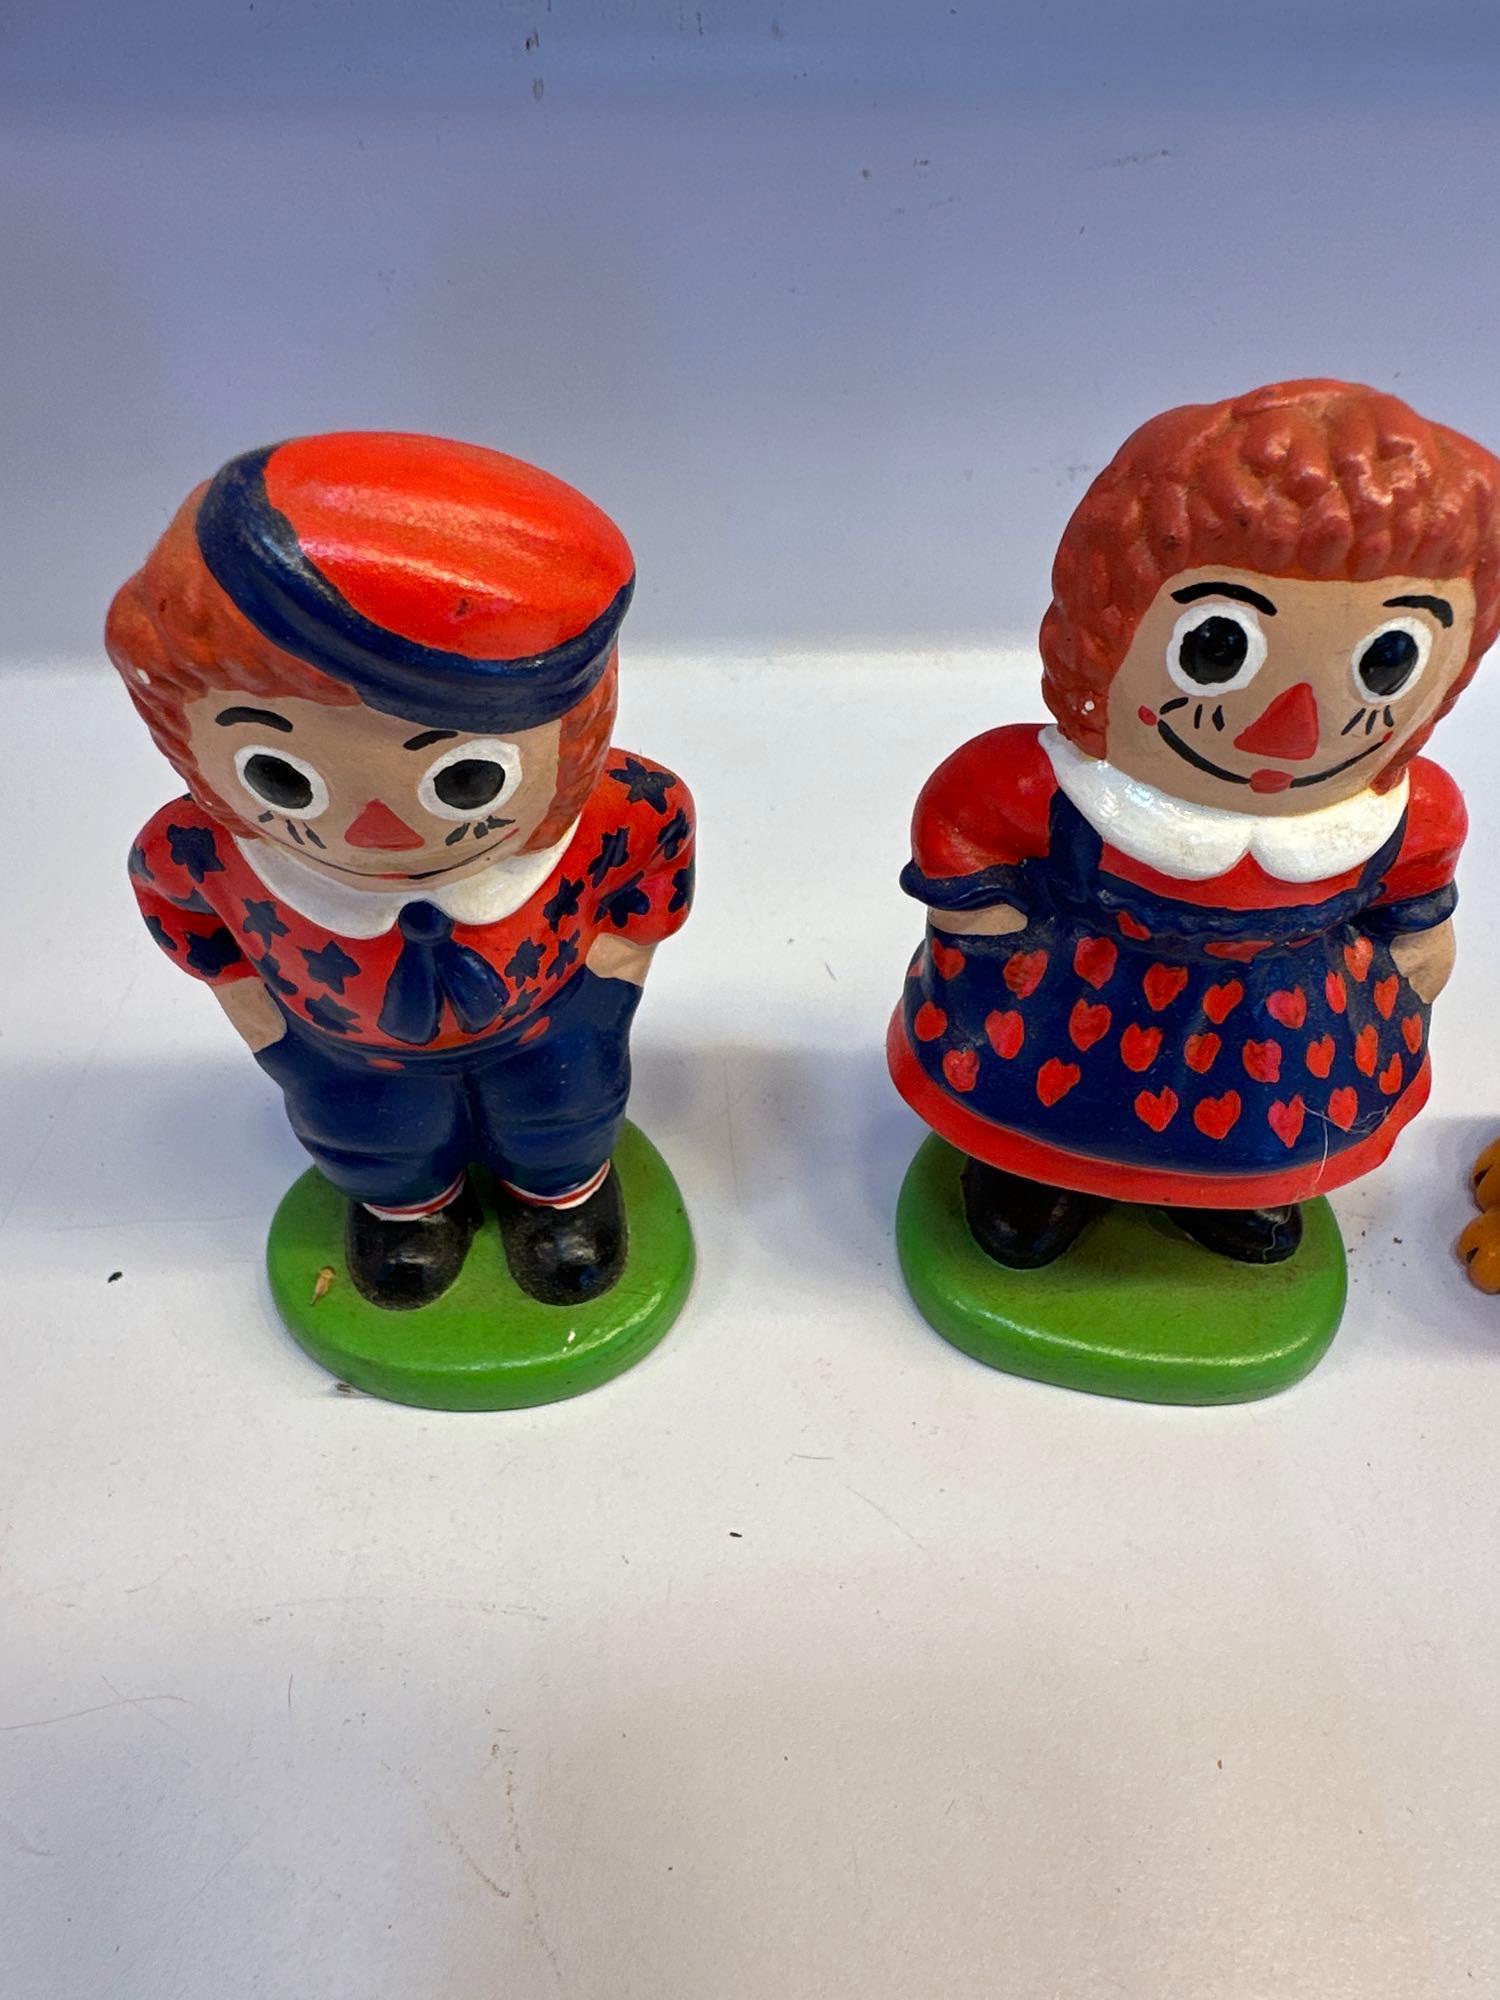 Raggedy Ann And Andy Porcelain Figuines/ Garfield / Raisin Figure